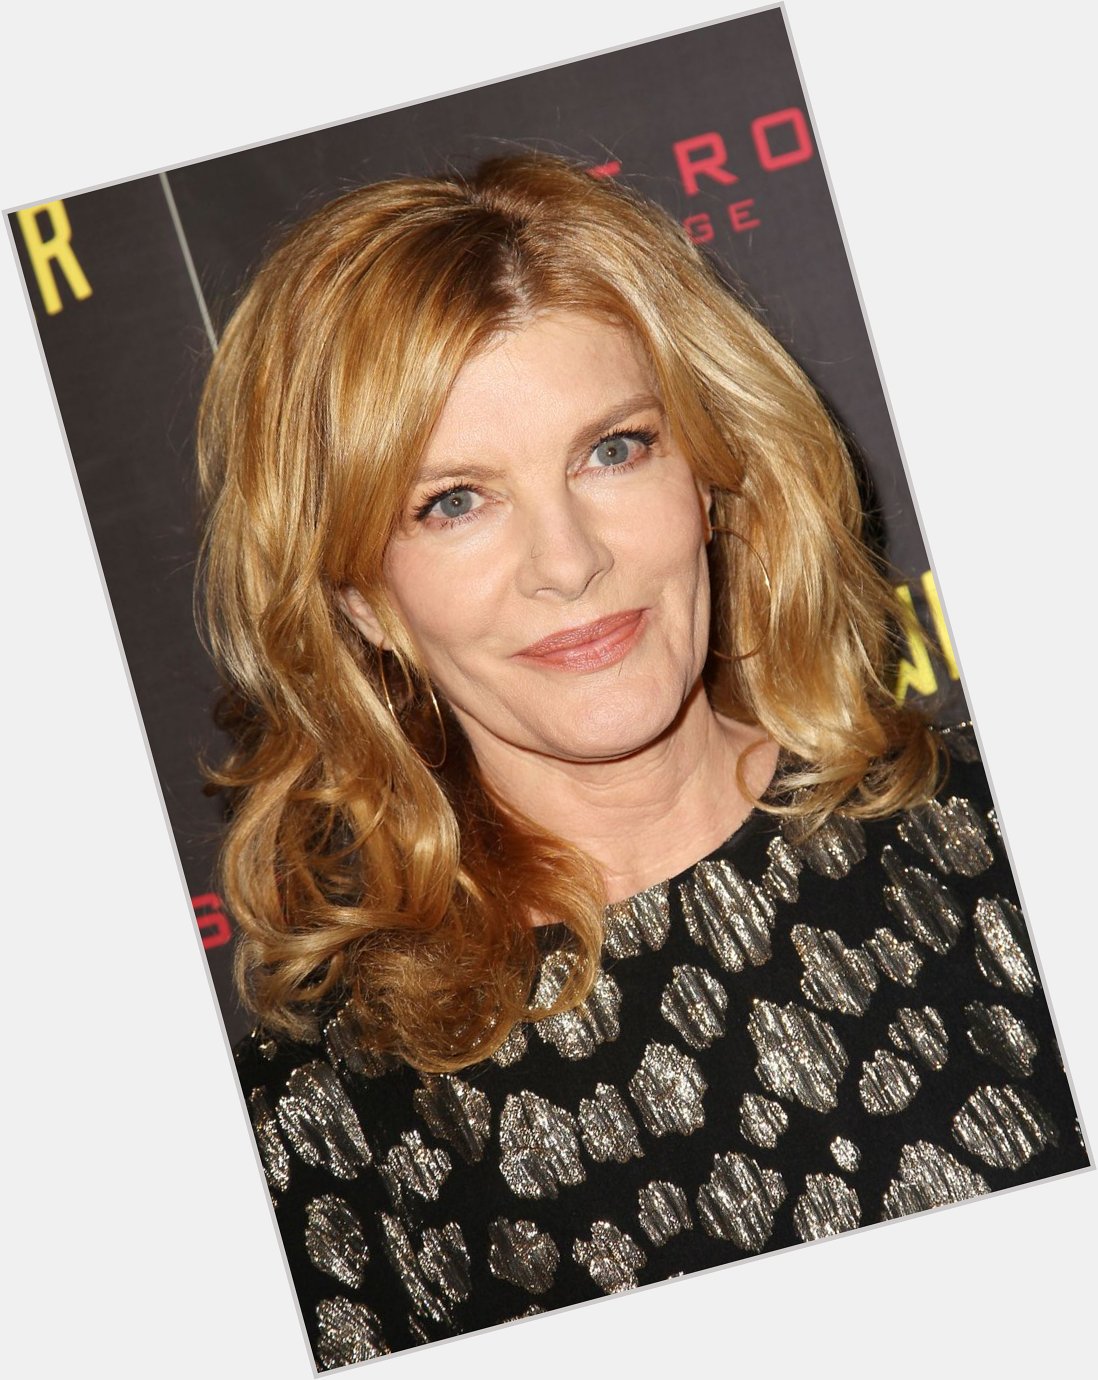 A very happy birthday to Rene Russo, born in 1954.
Better known to baseball fans as Lynn Wells of Major League. 